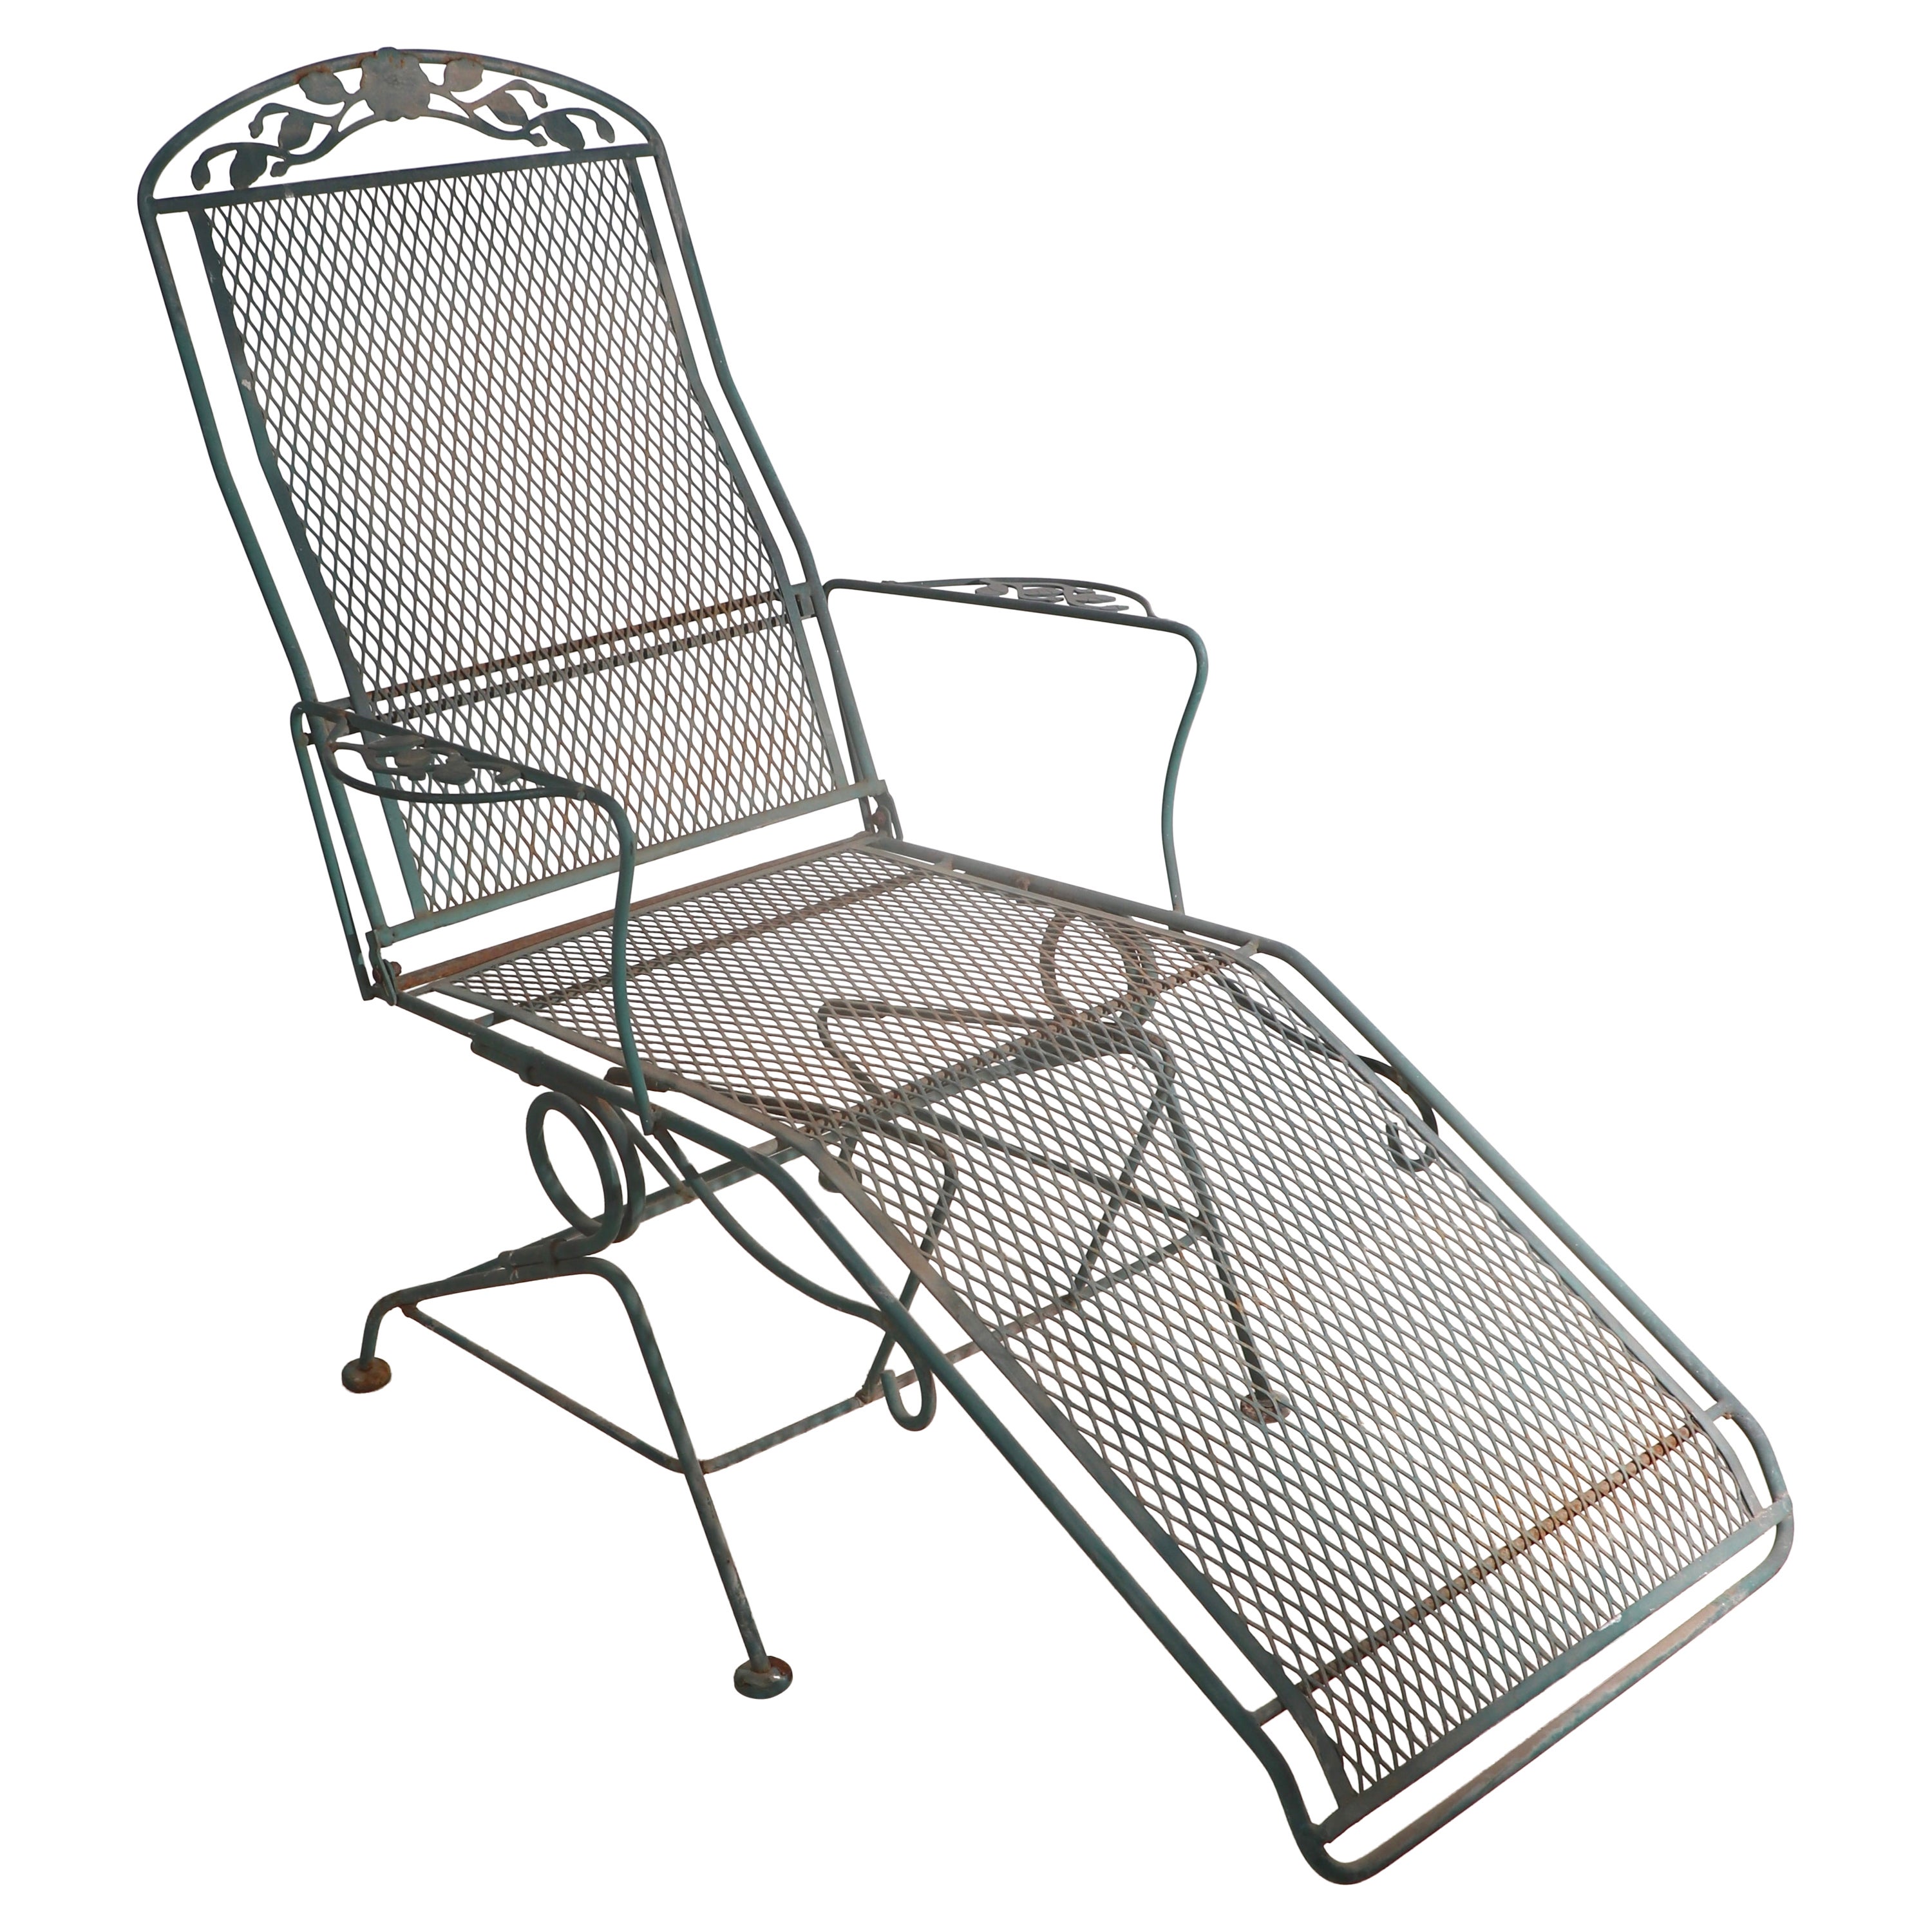 Wrought Iron Garden Patio Poolside Chaise Lounge Briarwood by Meadowcraft  For Sale